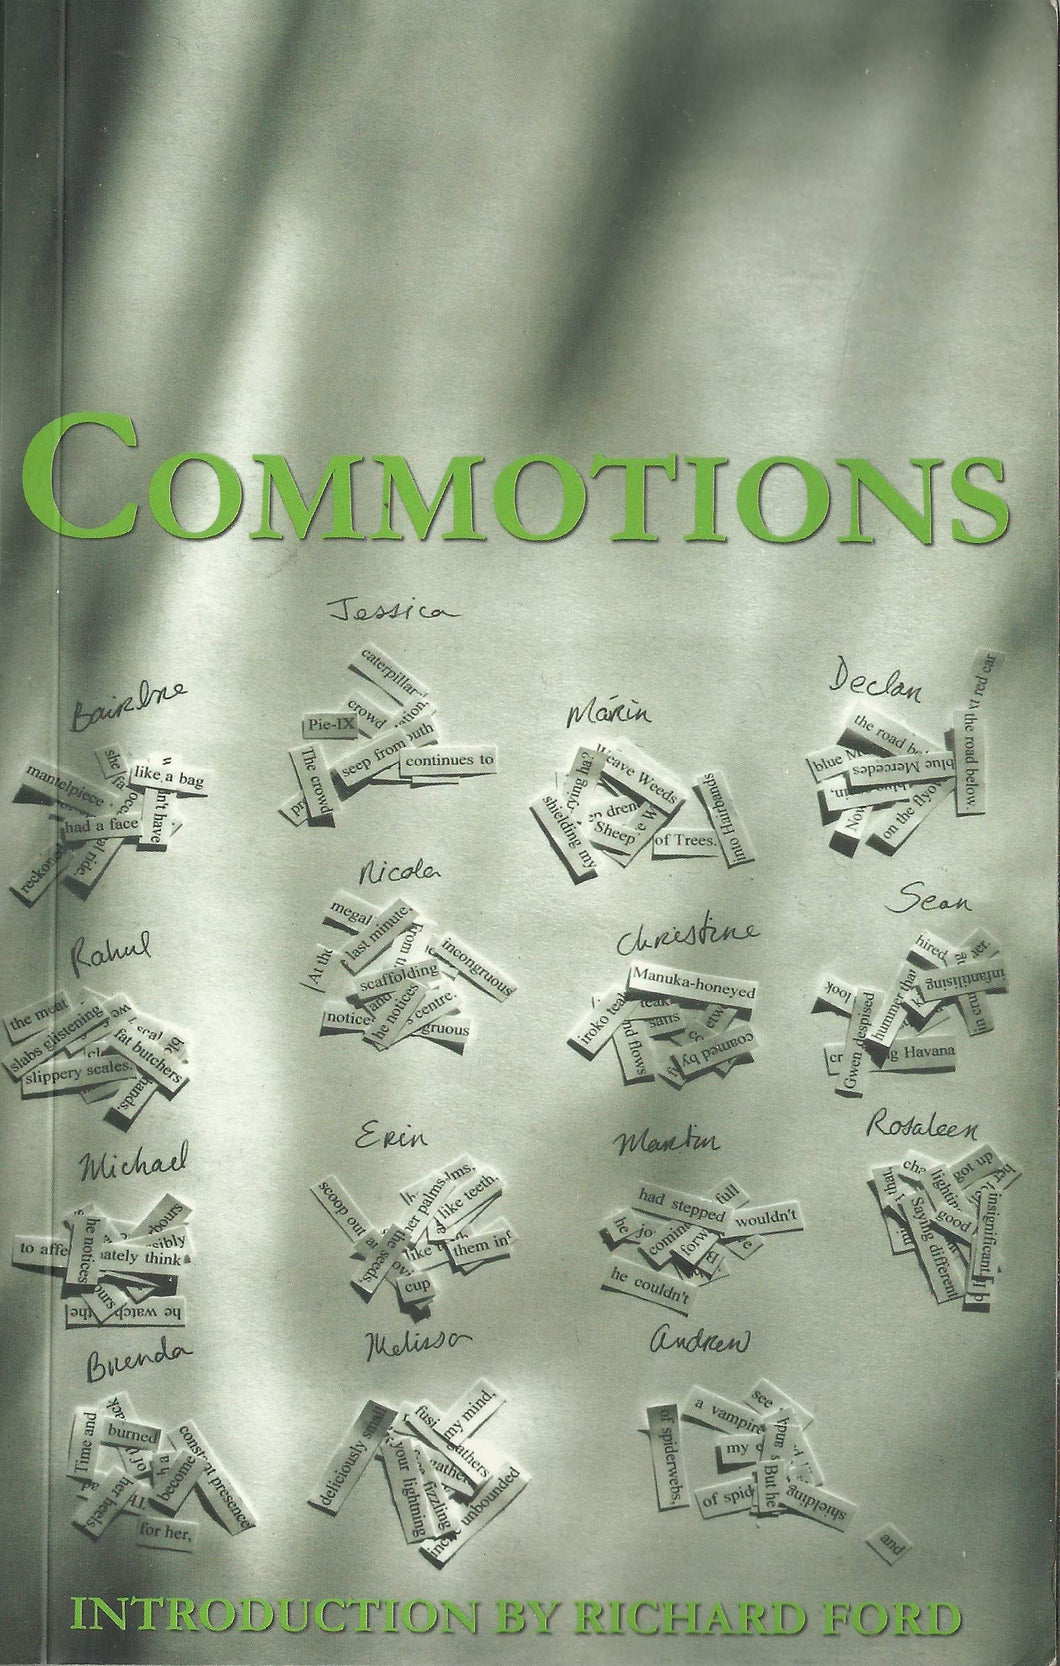 Commotions